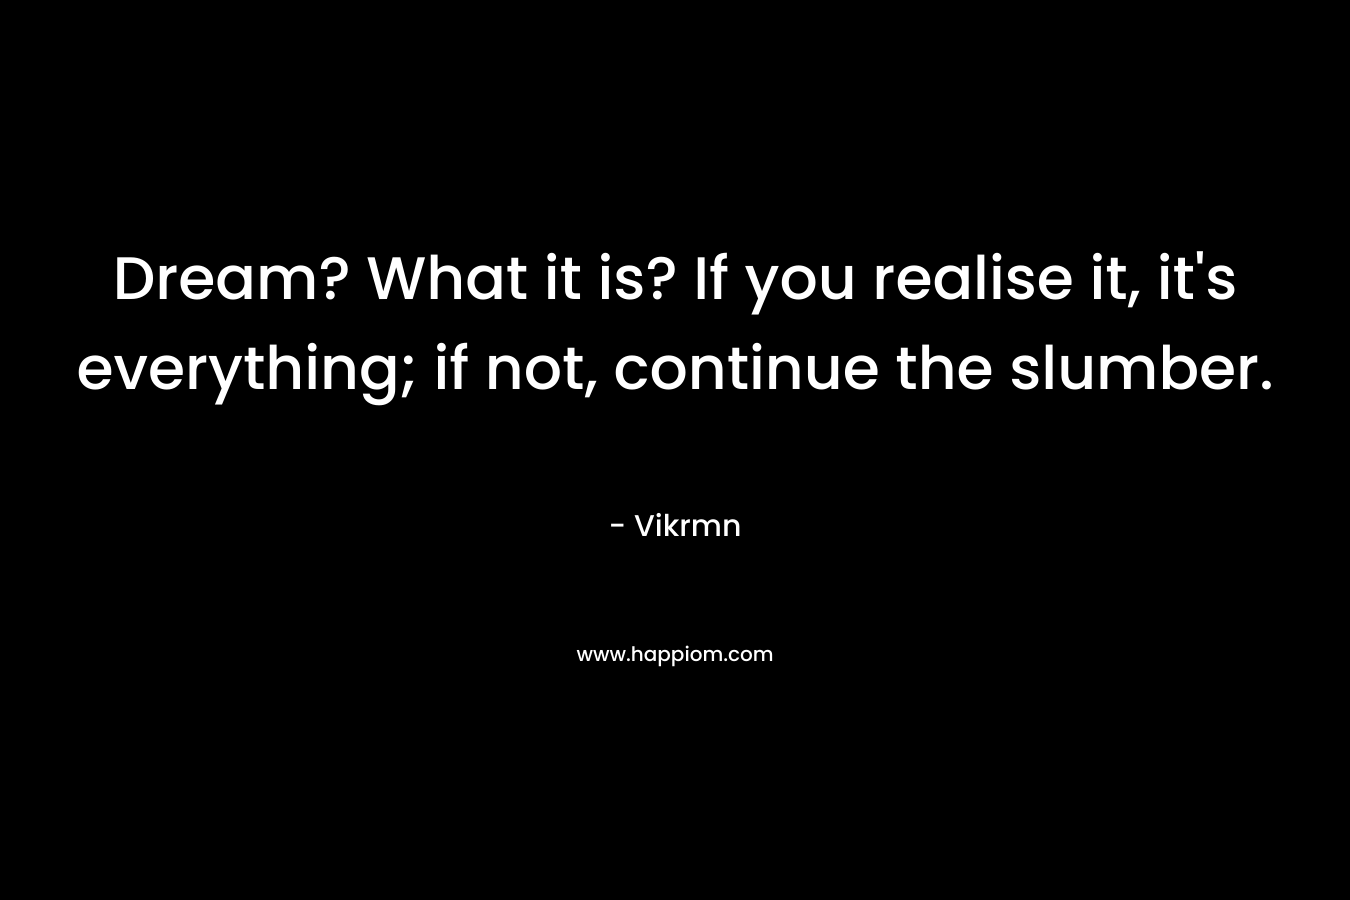 Dream? What it is? If you realise it, it’s everything; if not, continue the slumber. – Vikrmn